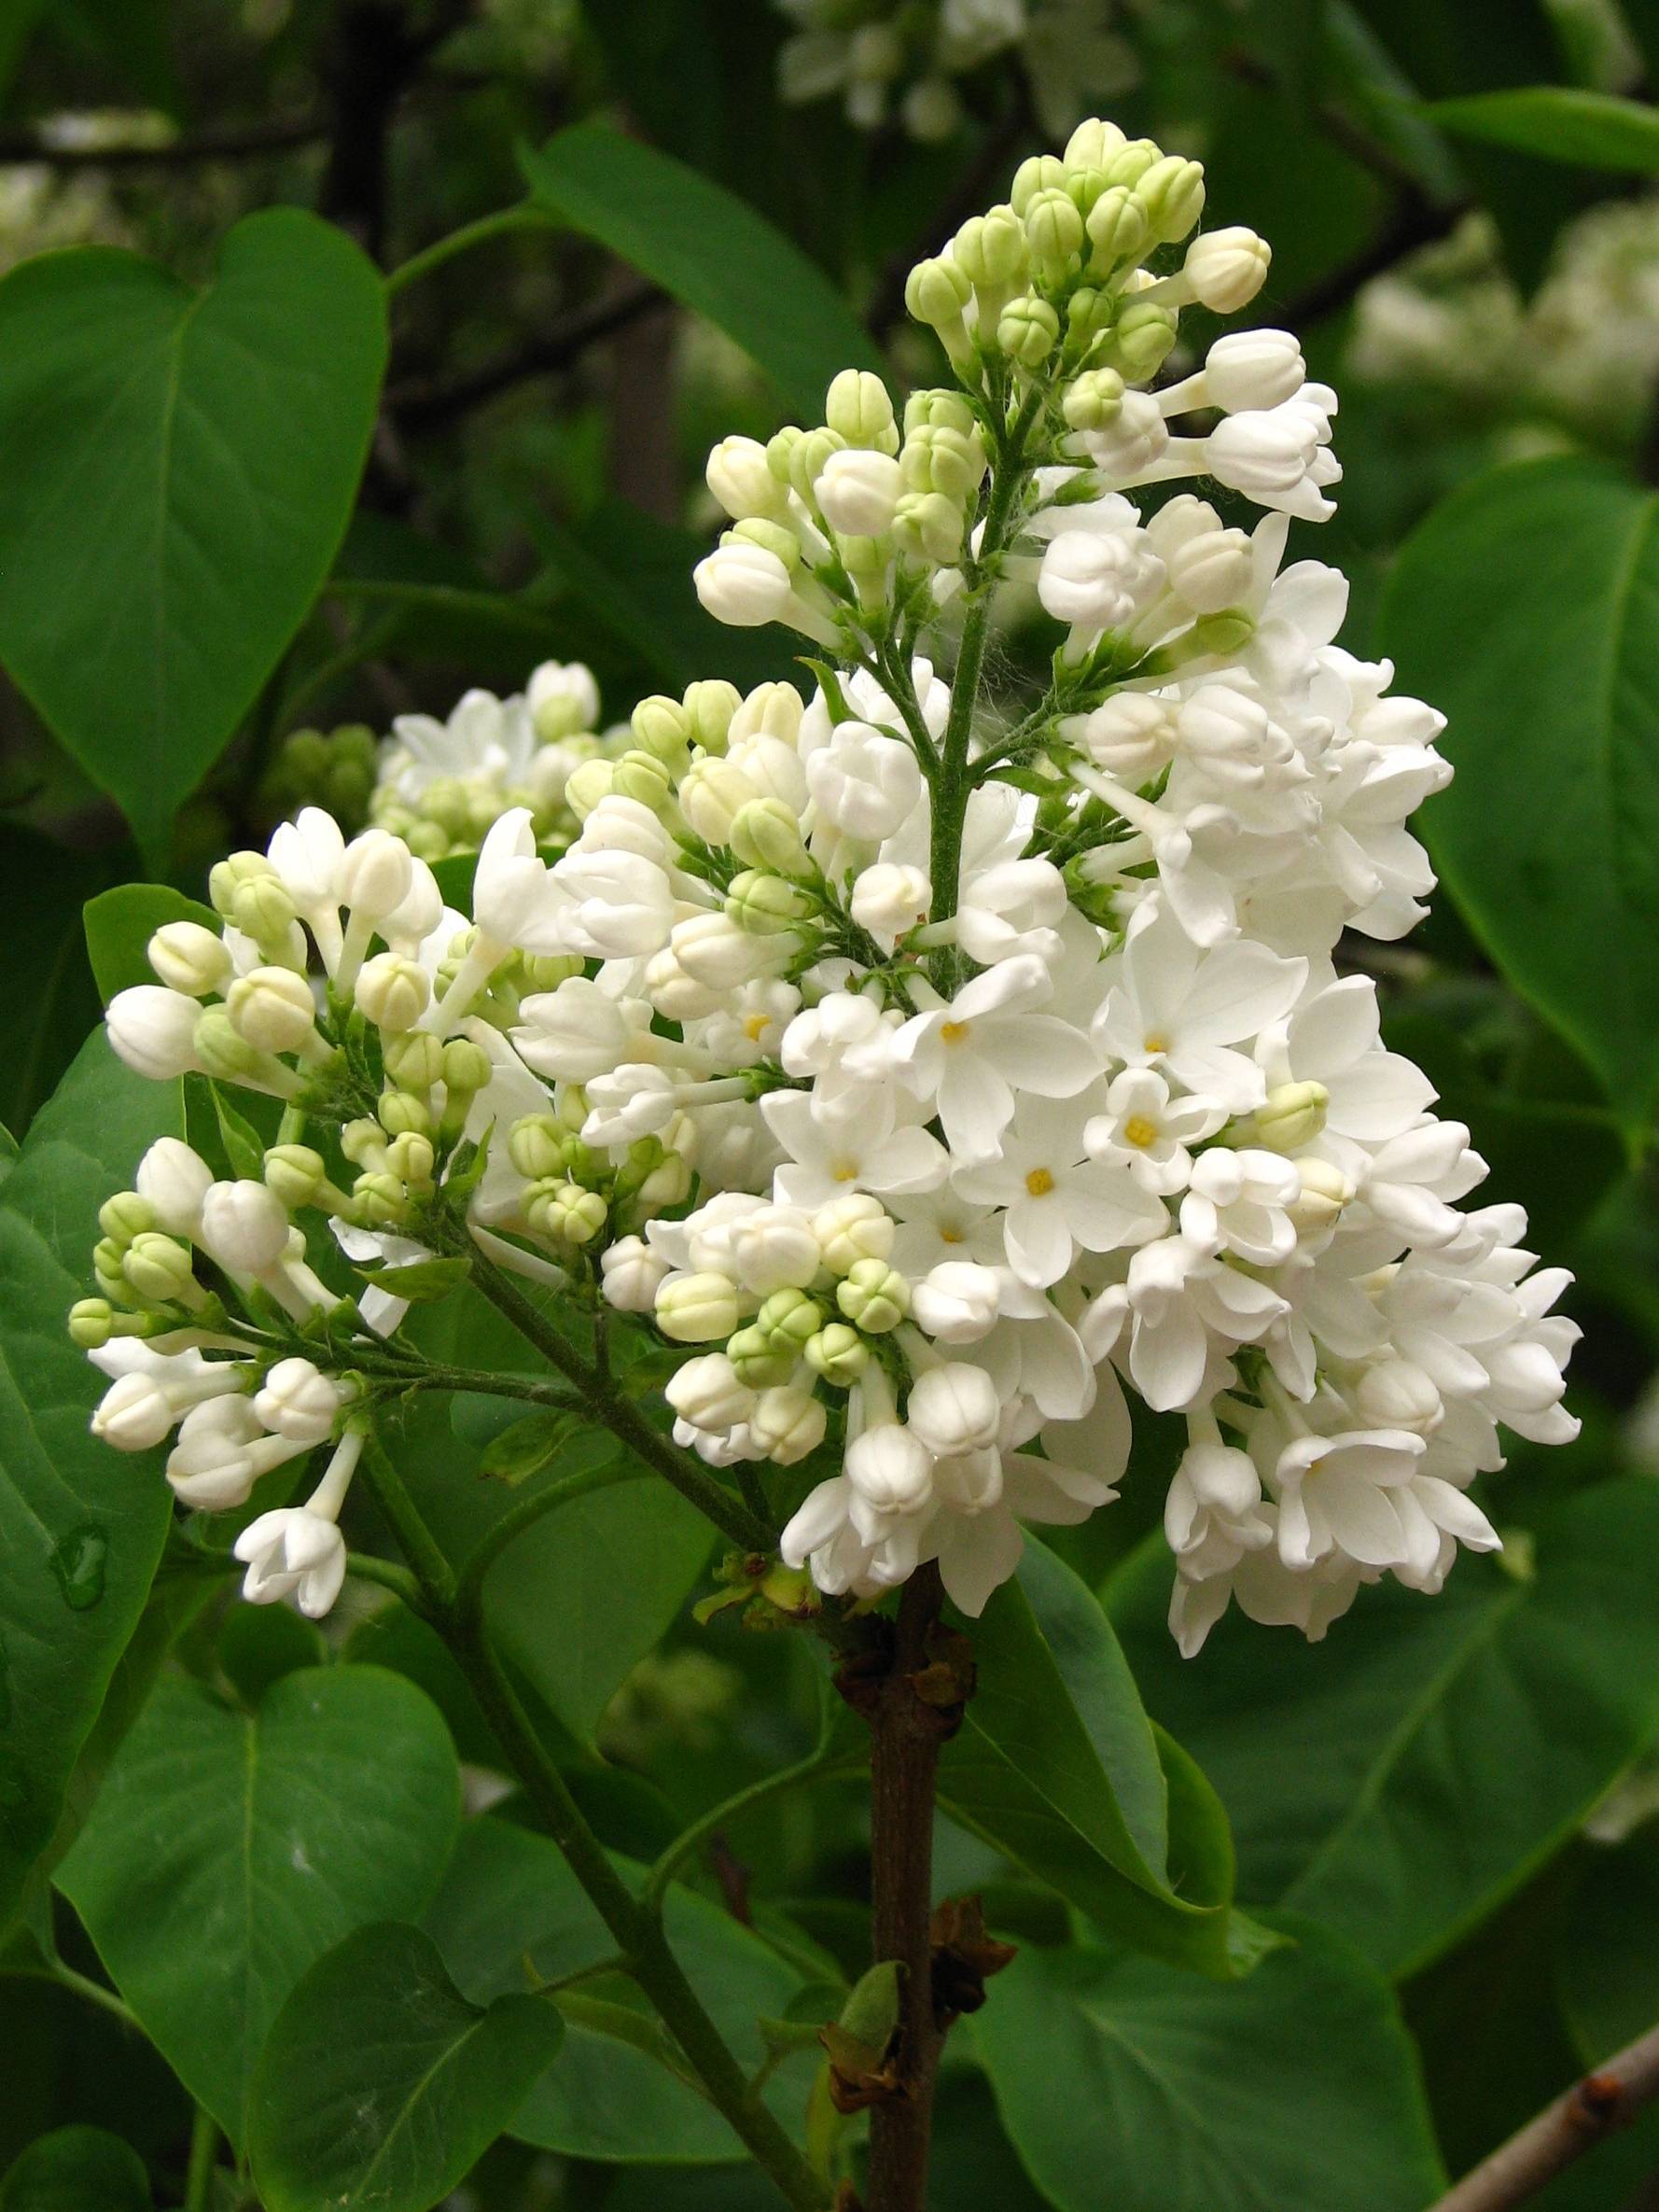 cream-white flowers with lime-white buds, green leaves and brown stems